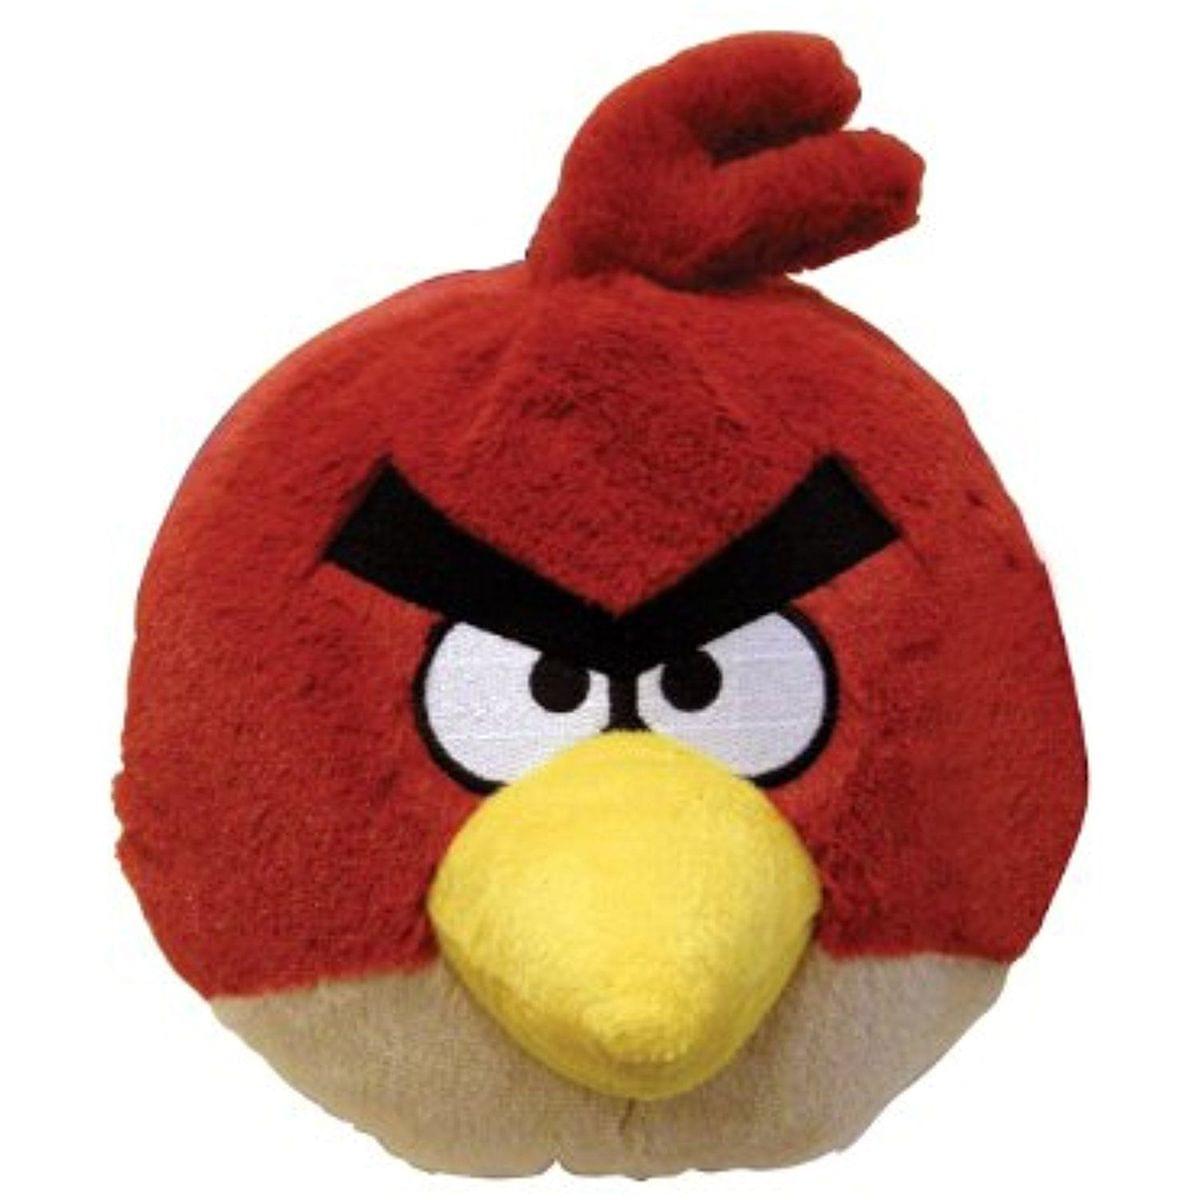 Angry Birds 16" Deluxe Plush: Red Bird